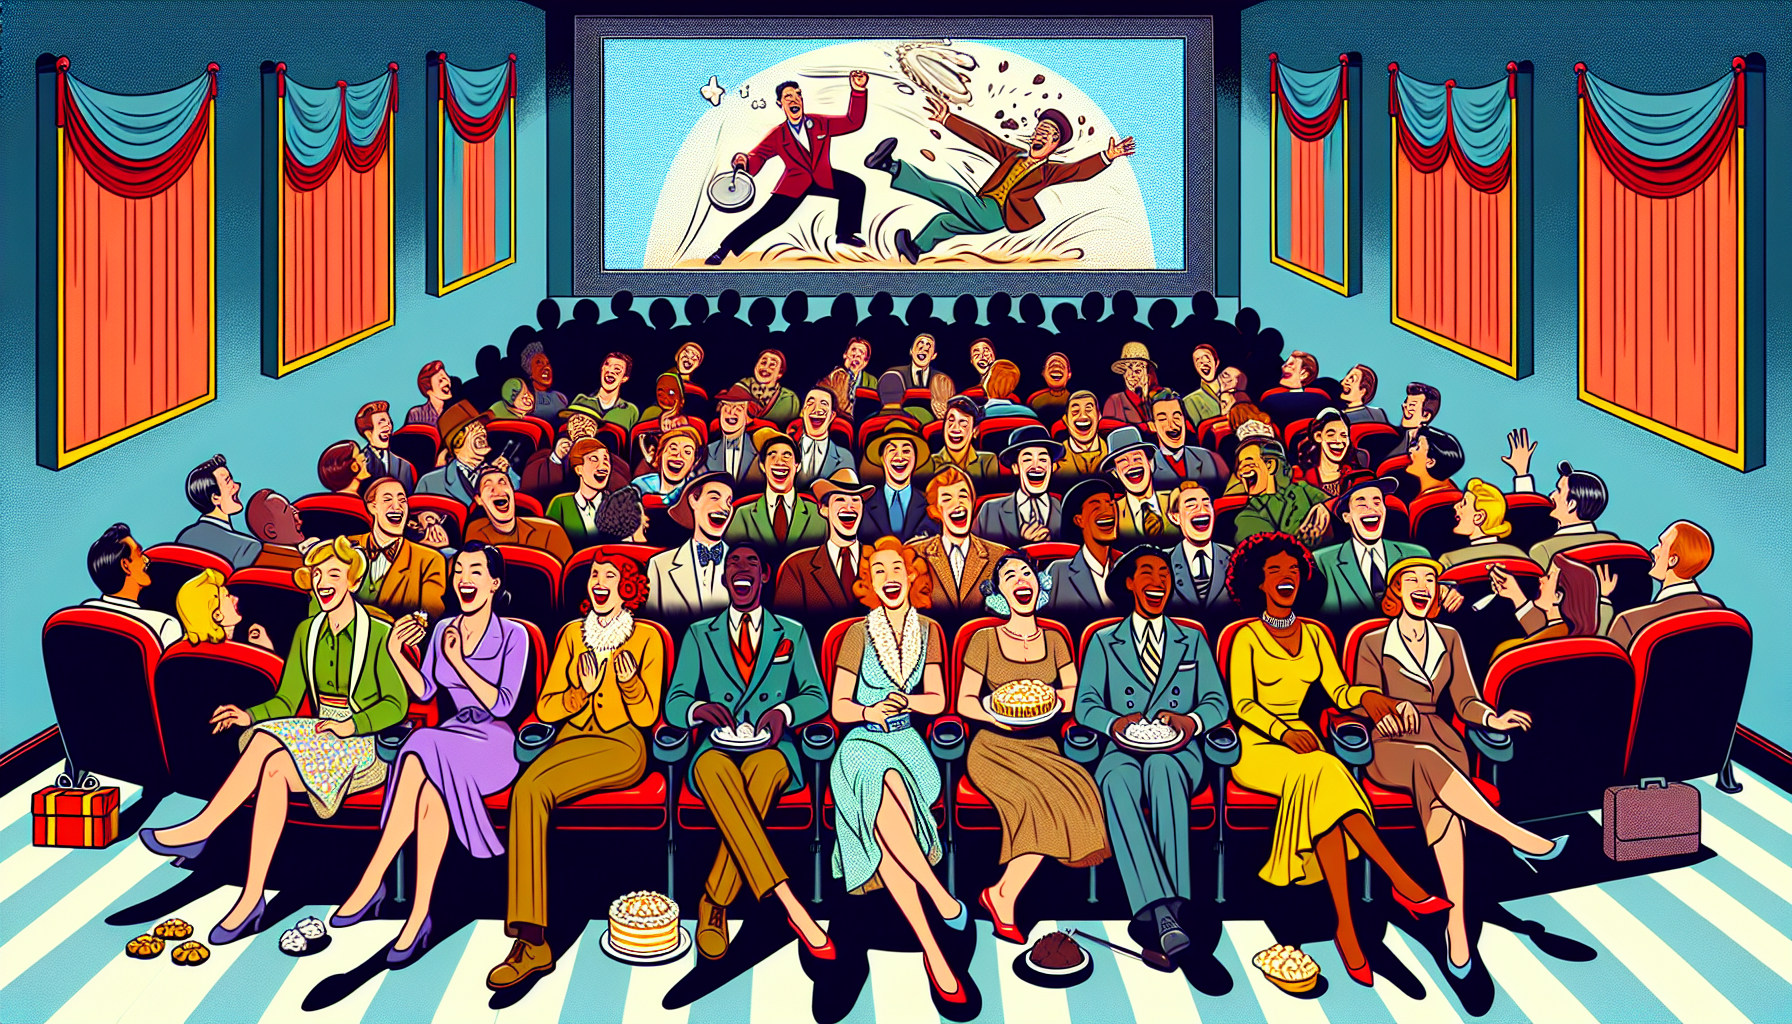 Vintage movie theater scene showing an audience of diverse people from different eras, ranging from the 1920s to modern-day, laughing heartily while watching a classic slapstick comedy film on the big